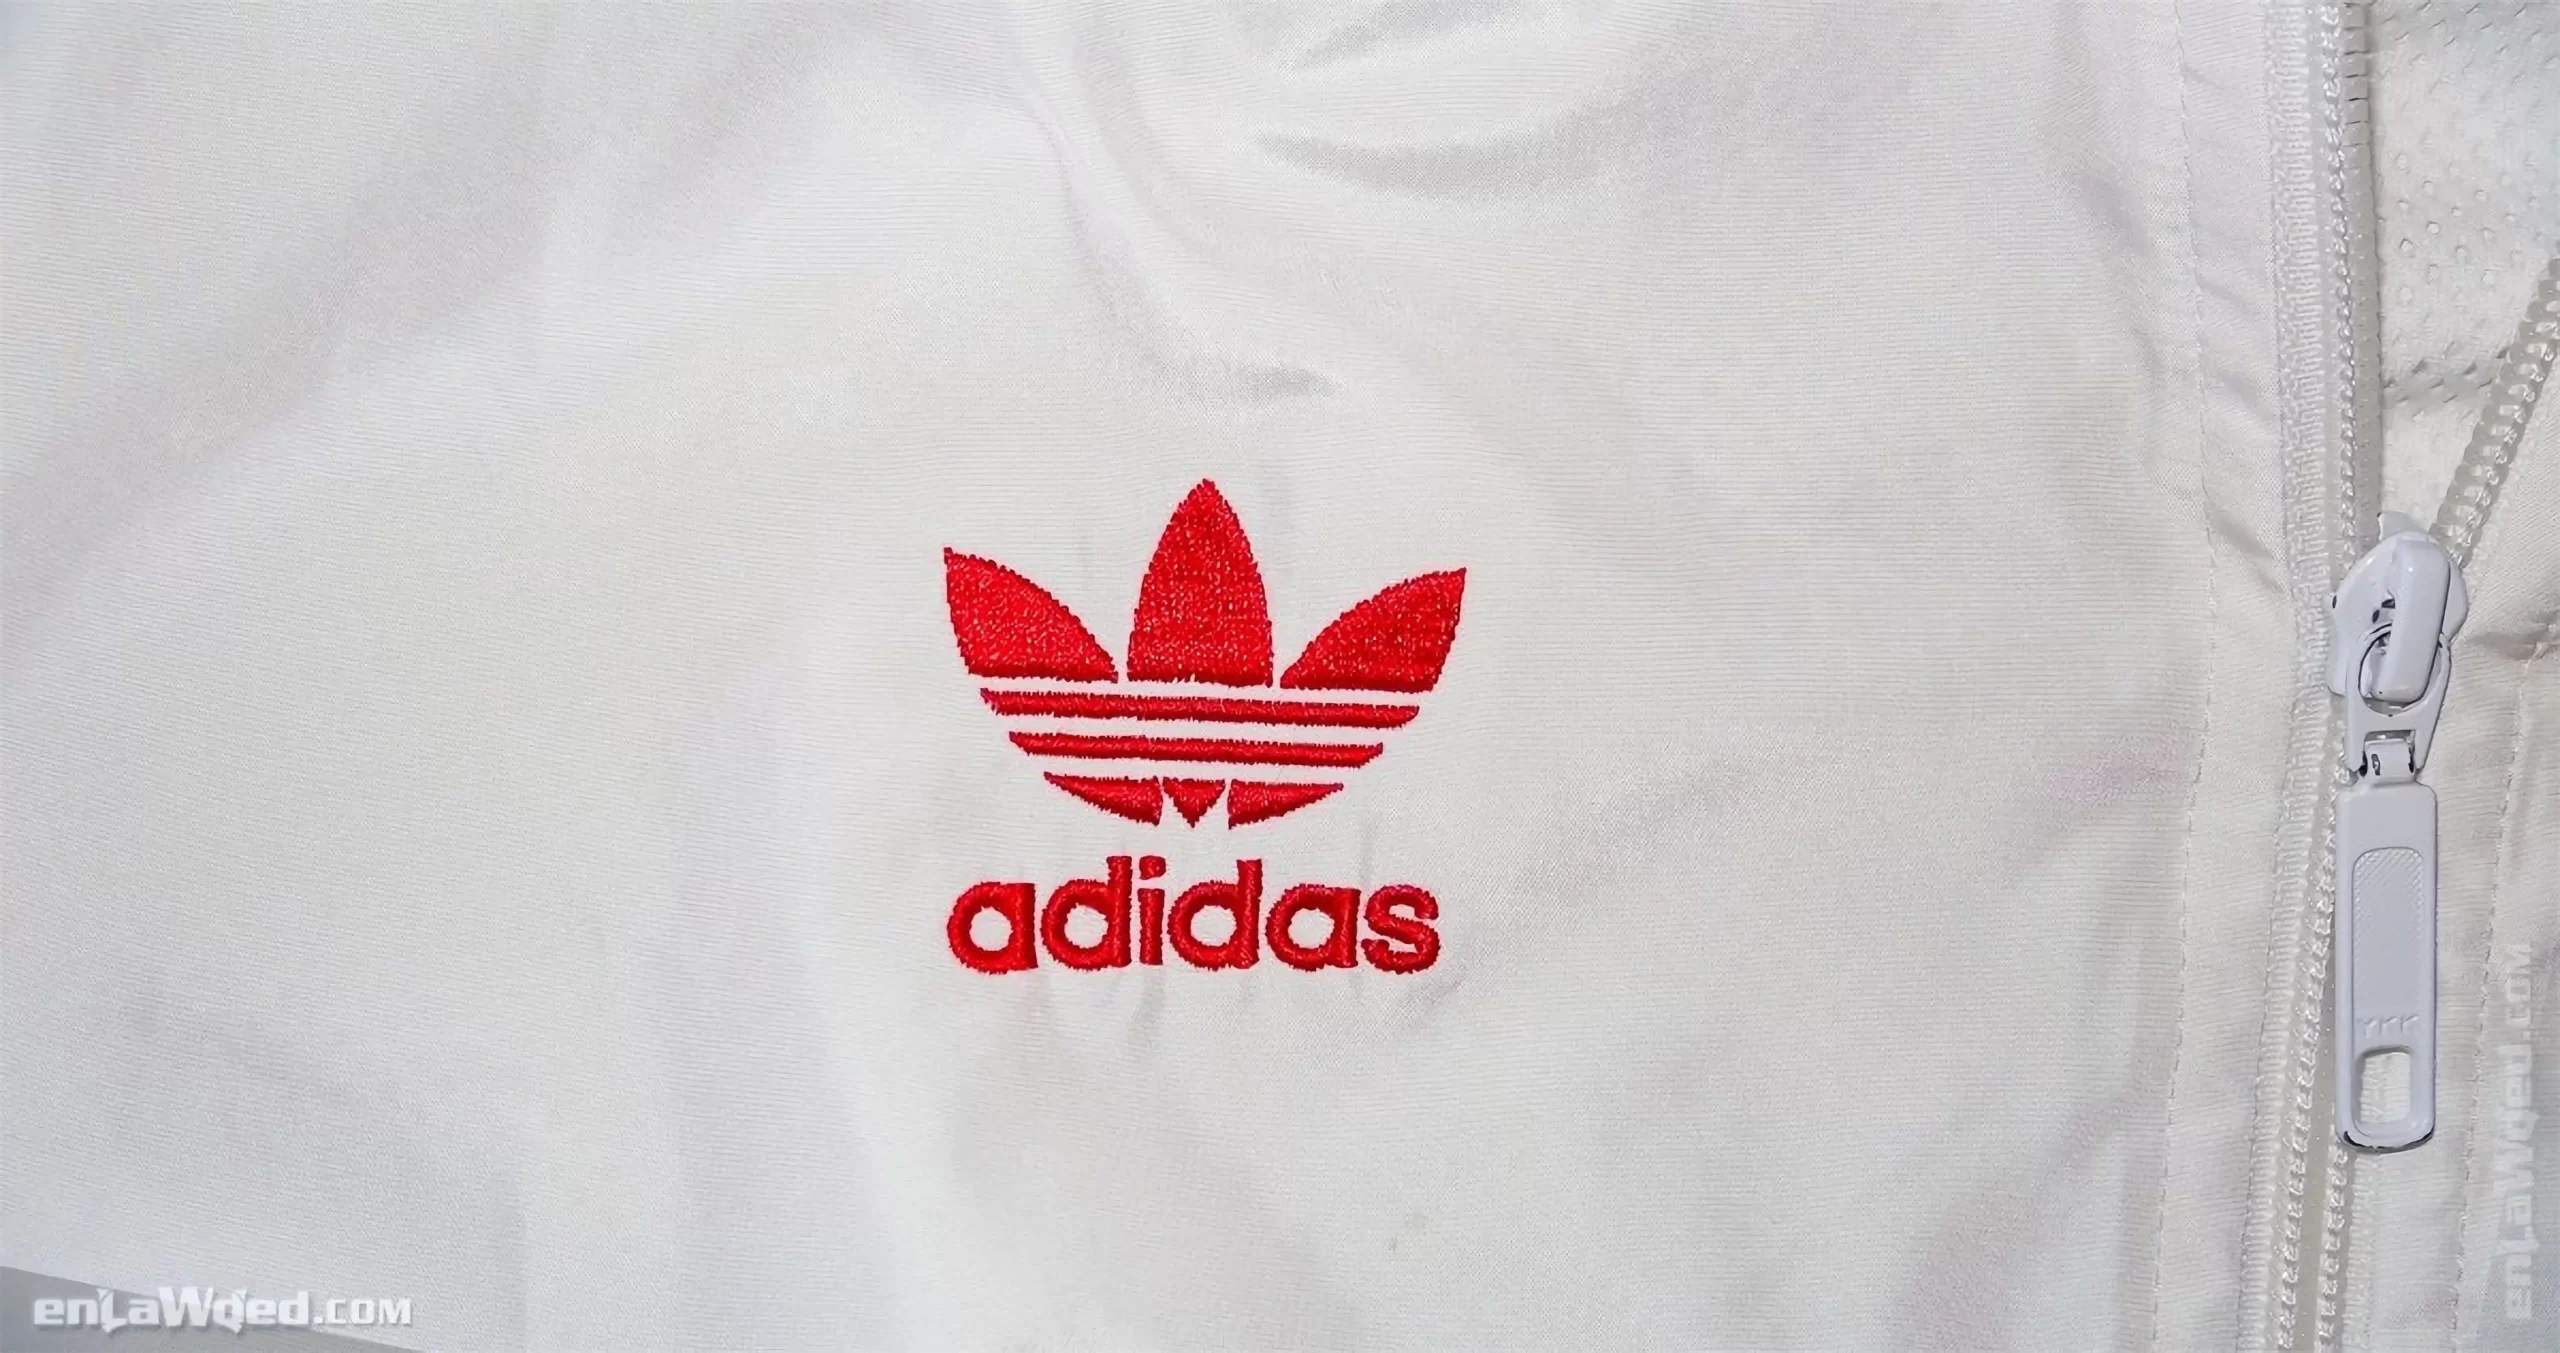 Men’s 2005 Great Britain Olympic ’84 TT by Adidas: Supported (EnLawded.com file #lmcemhzreowiknhbr9o)